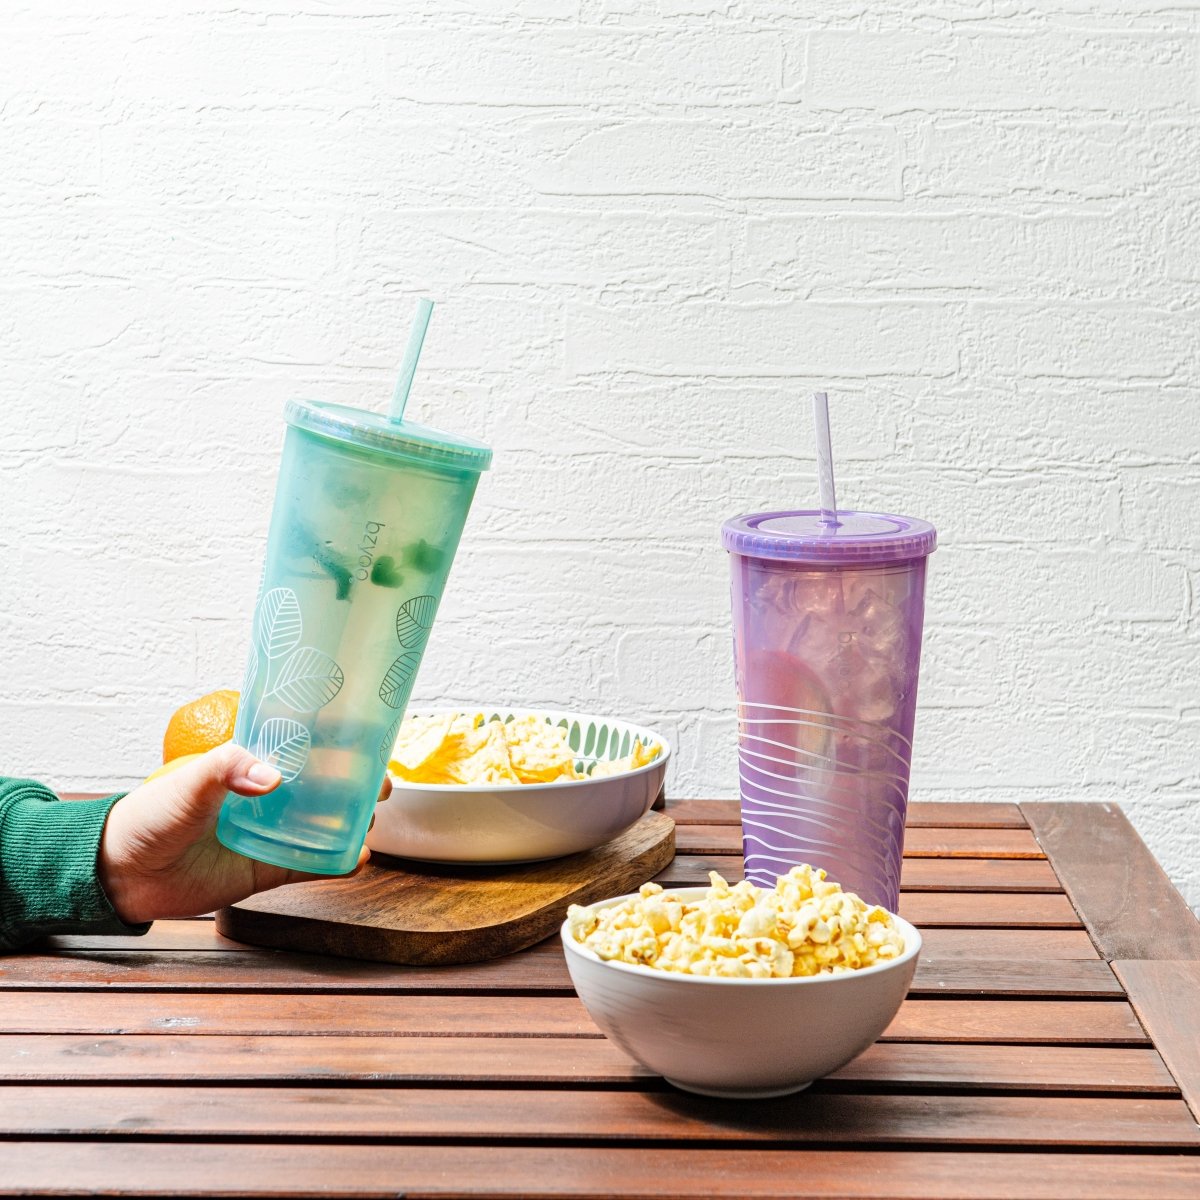 Sippy Cup with Straw - Cloud – EKOBO USA